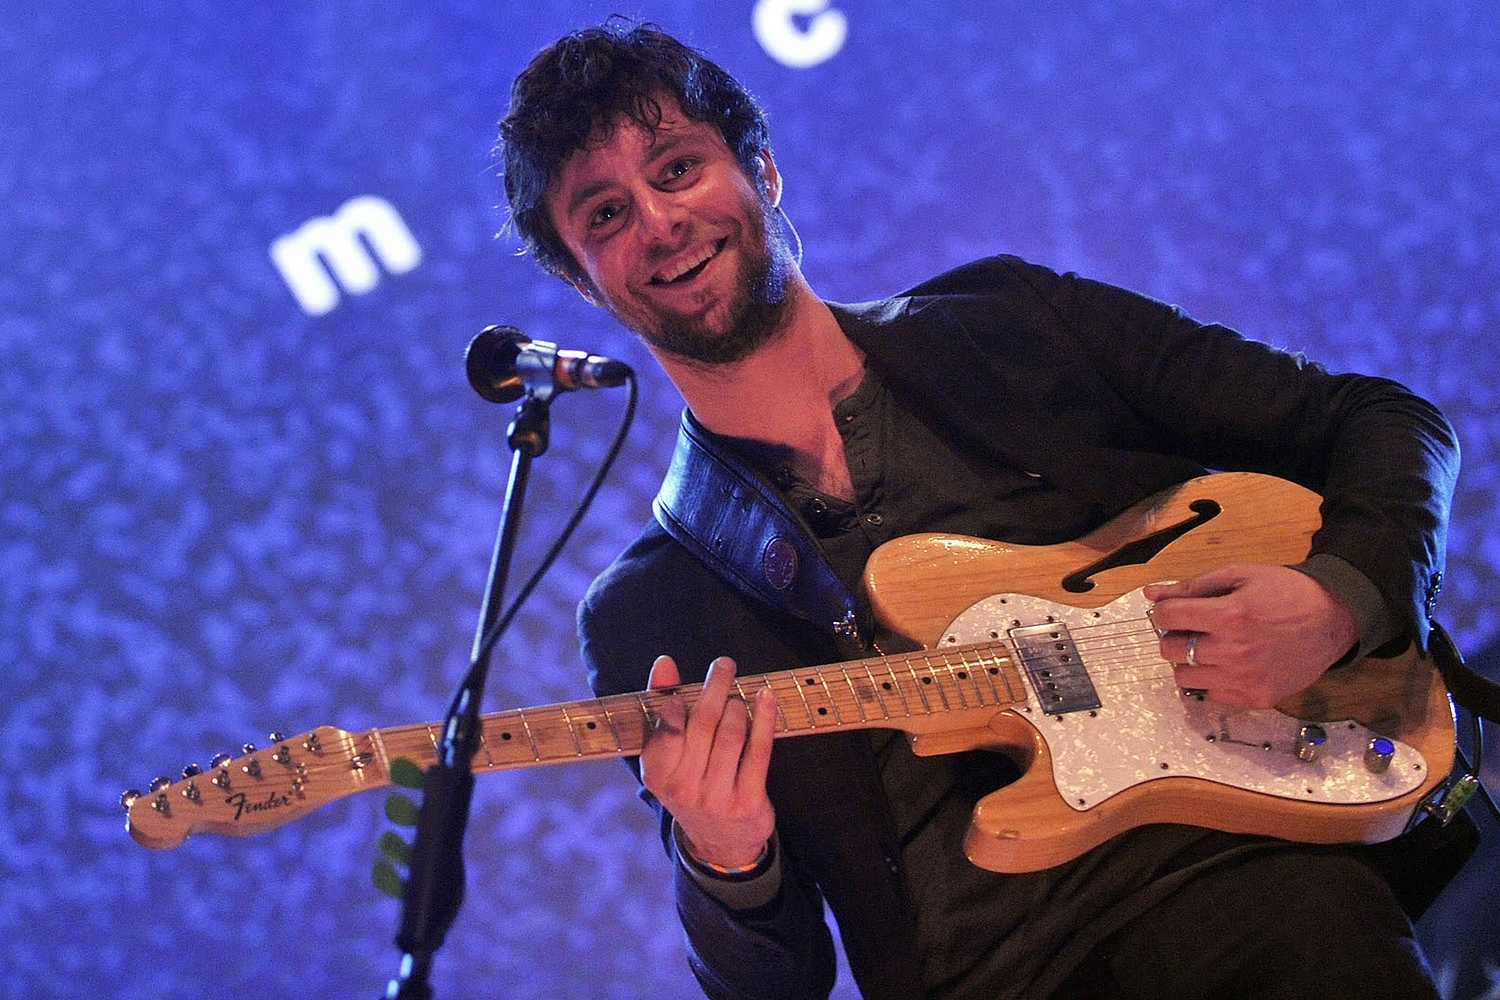 Watch The Maccabees, Young Fathers, Jungle play BBC 6 Music Festival